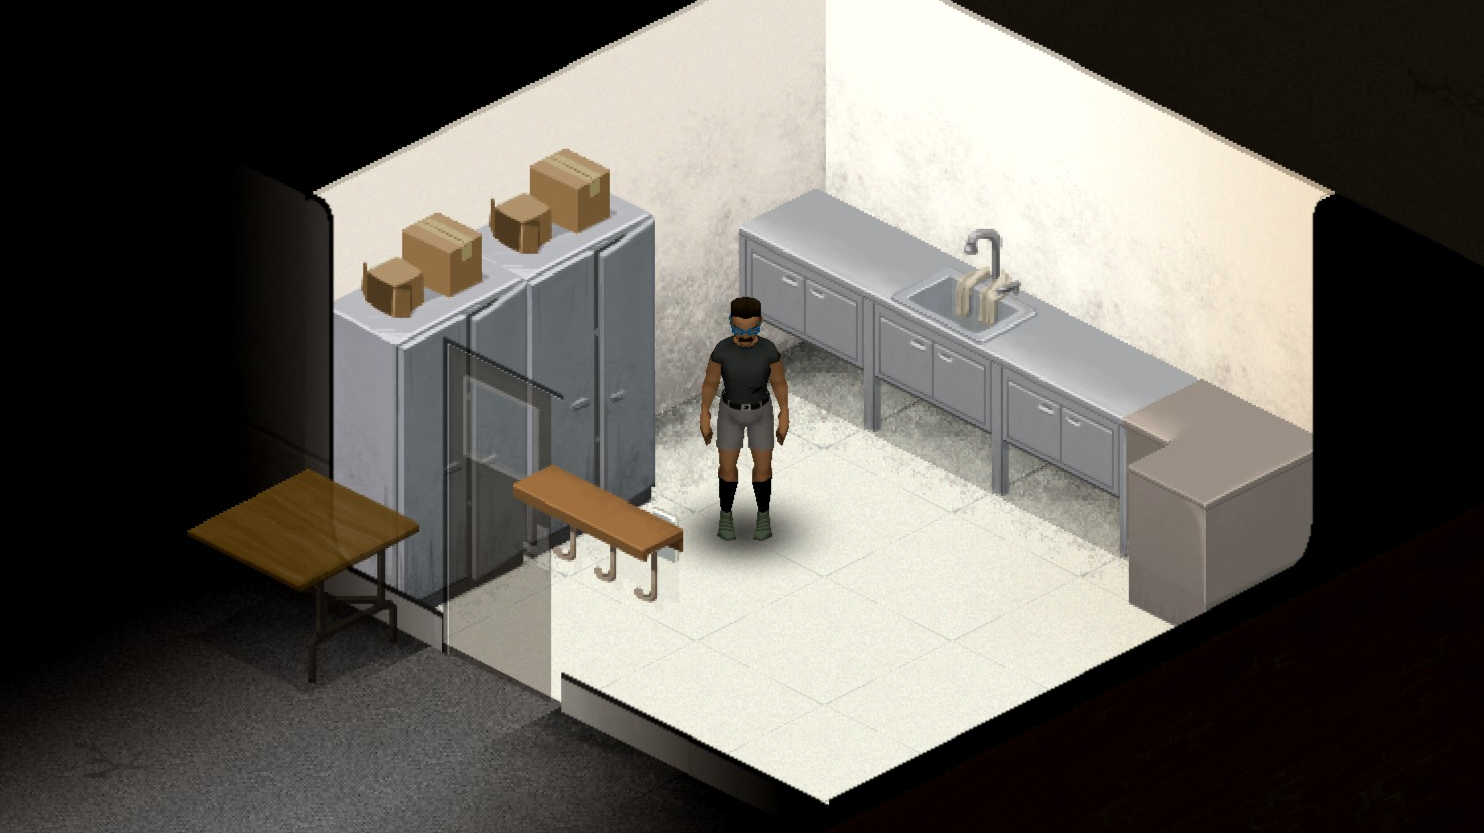 Project Zomboid - Tips How to Get Best Gear in Rosewood Guide - Step 2. Loot the fire department - E78A23B